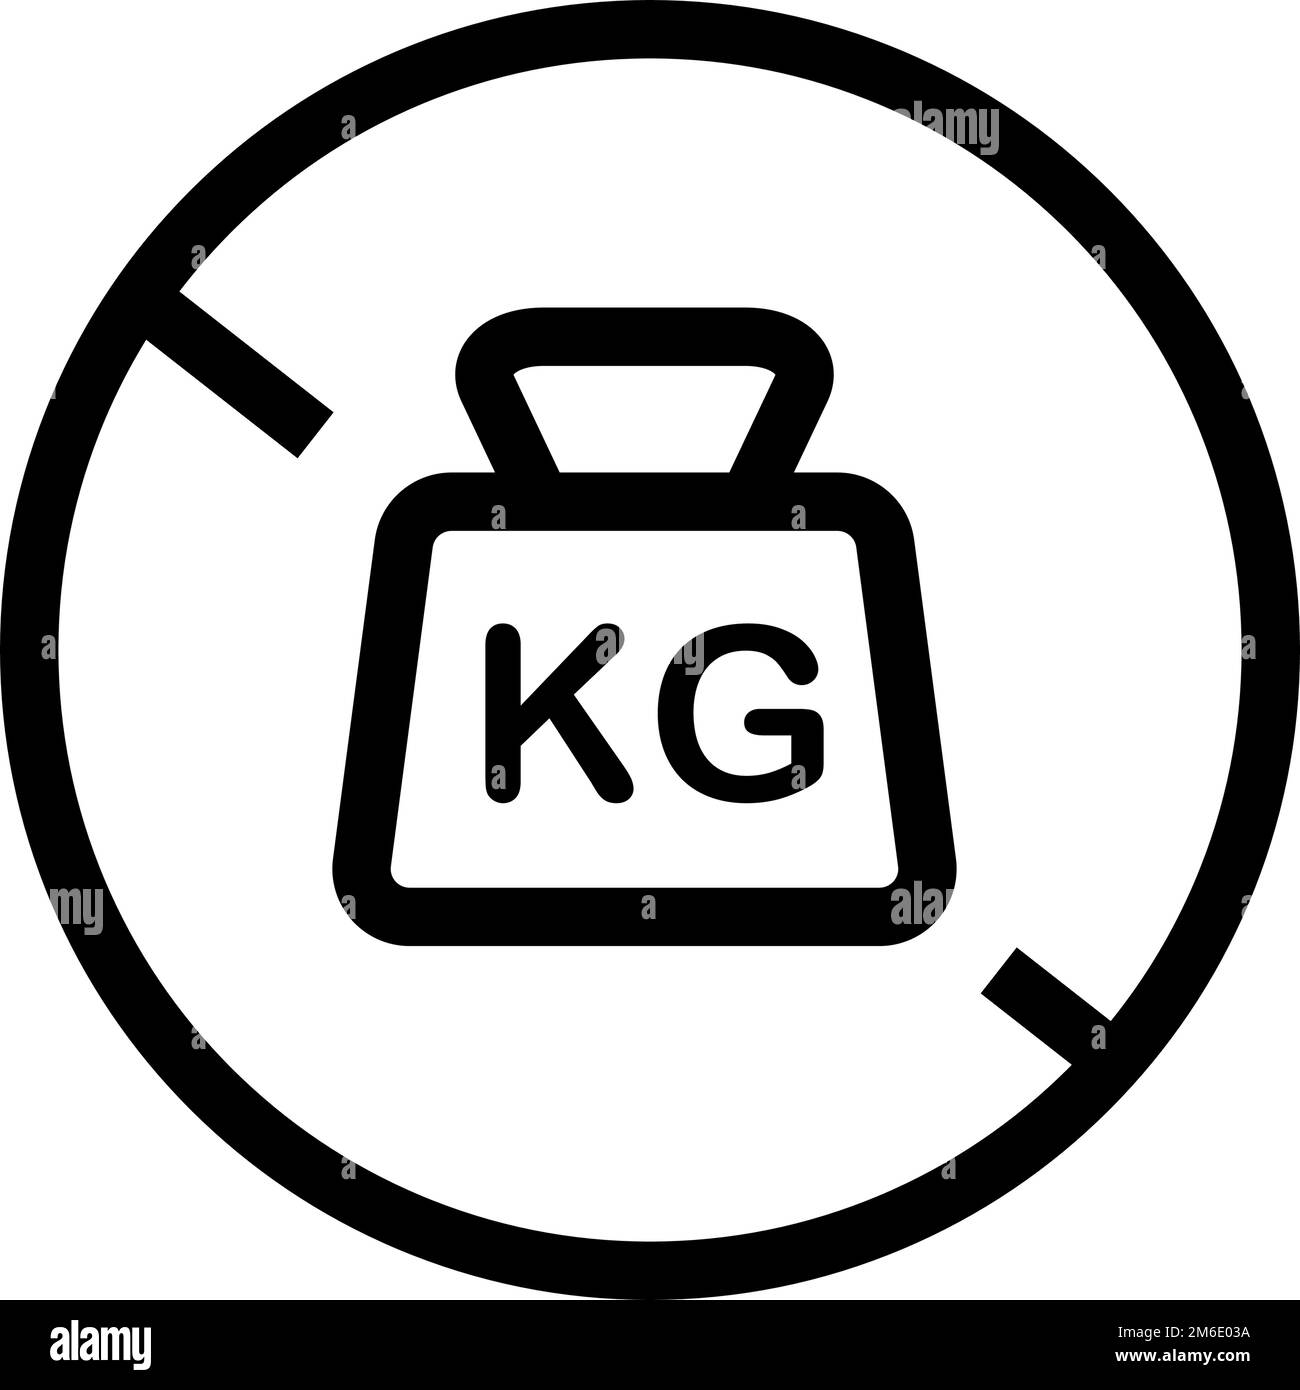 Prohibit the use of KG weight. caution sign for KG weight. Editable vector. Stock Vector